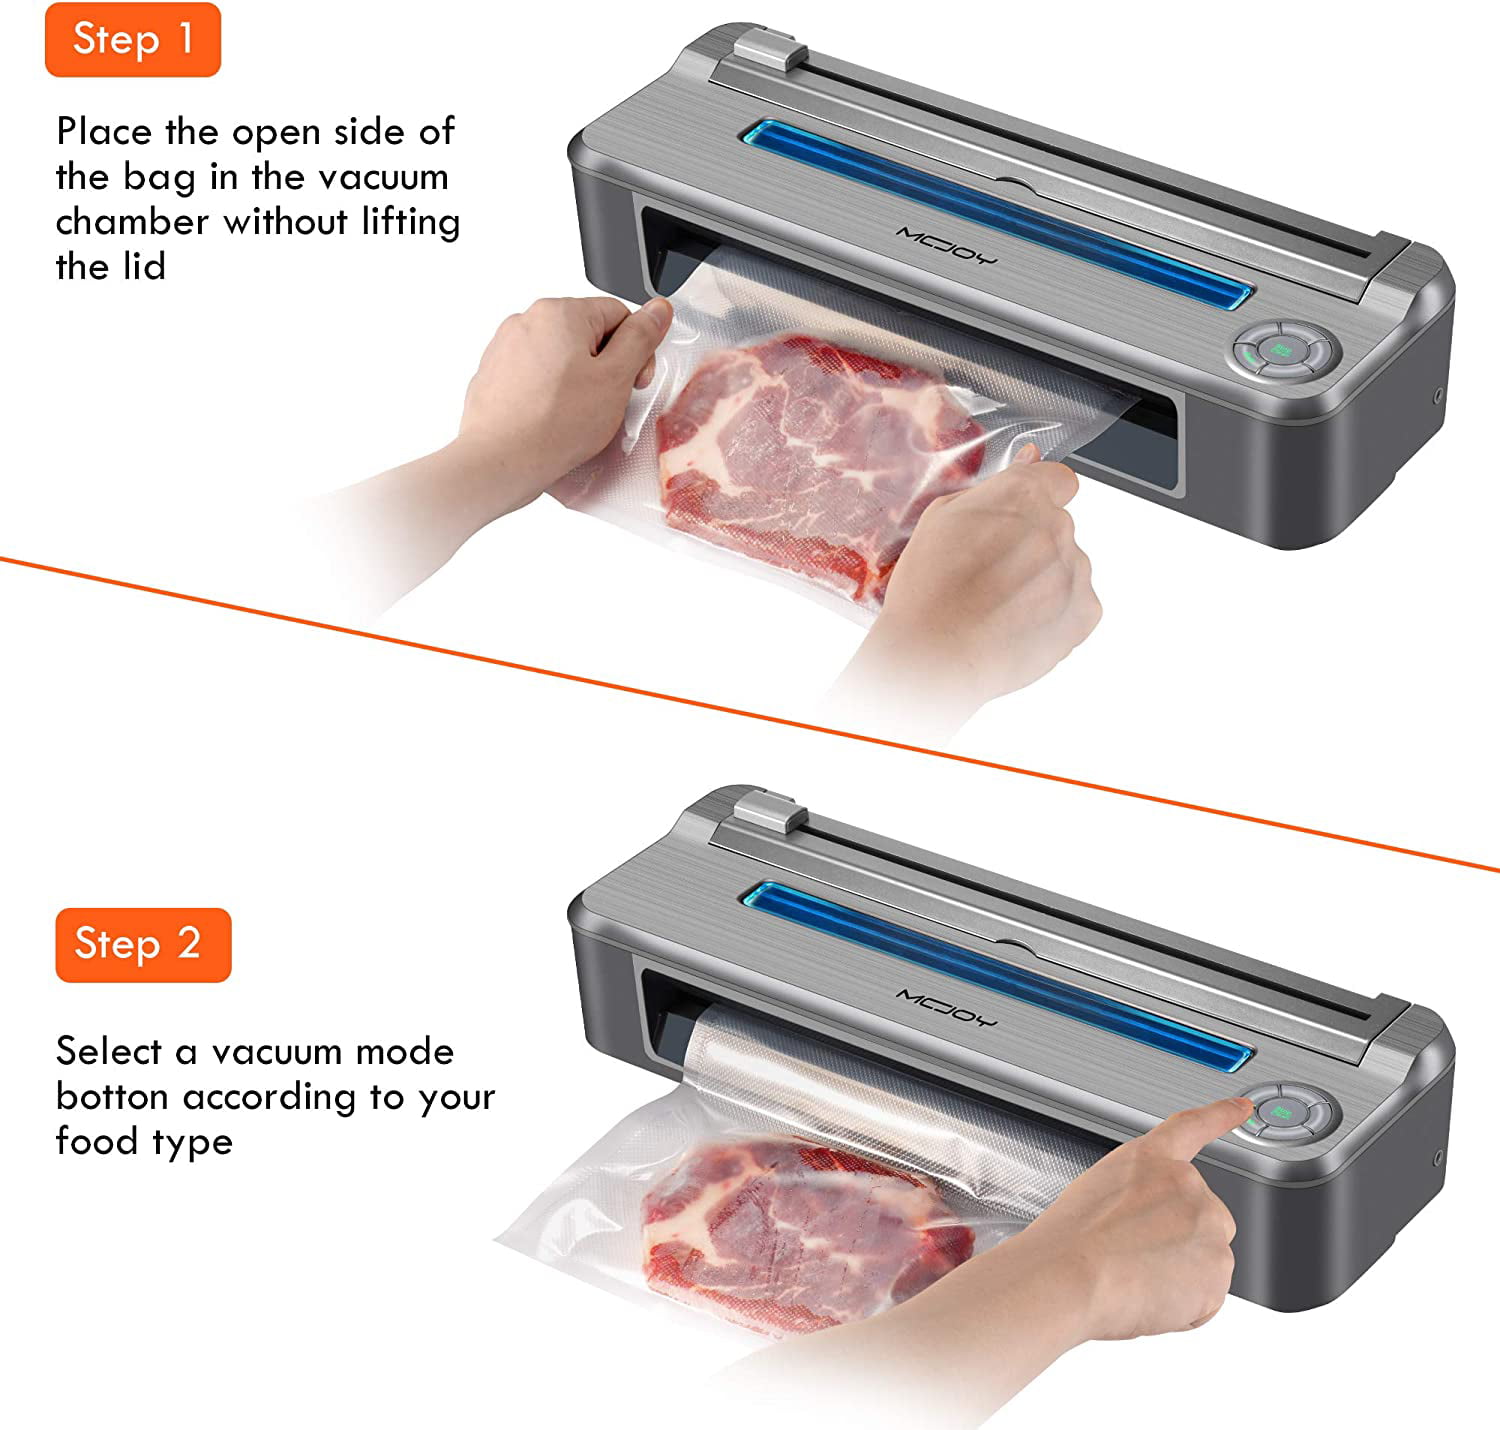 Ecojoy 12 Commercial Vacuum Sealer V9200,90kpa Continuously Uses 500+  Foodsaver Without Stoping, 7 Modes Double Pump Stainless Seal a Meal Vacuum